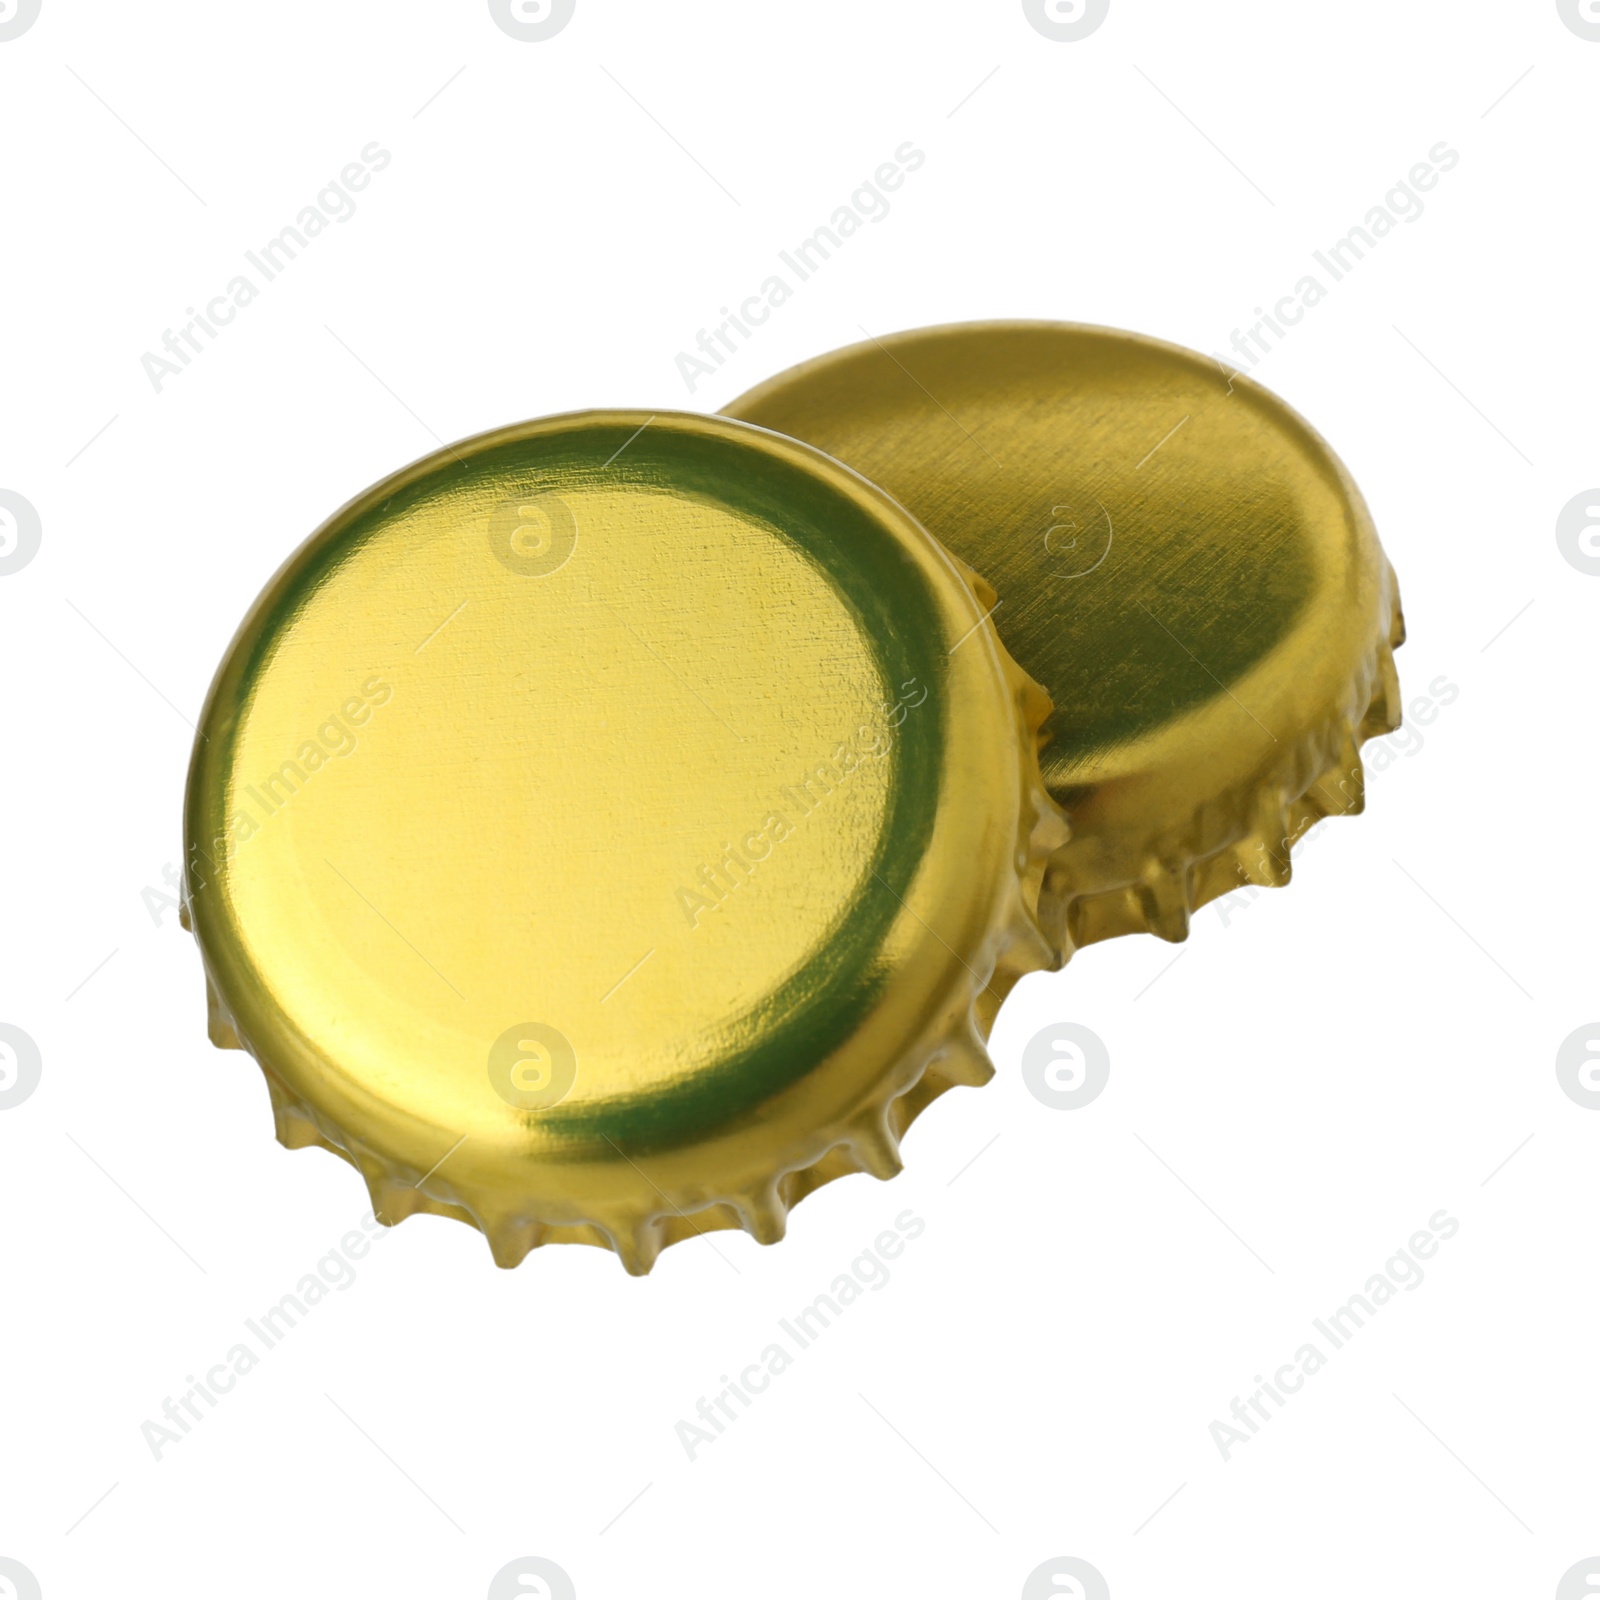 Photo of Two golden beer bottle caps isolated on white